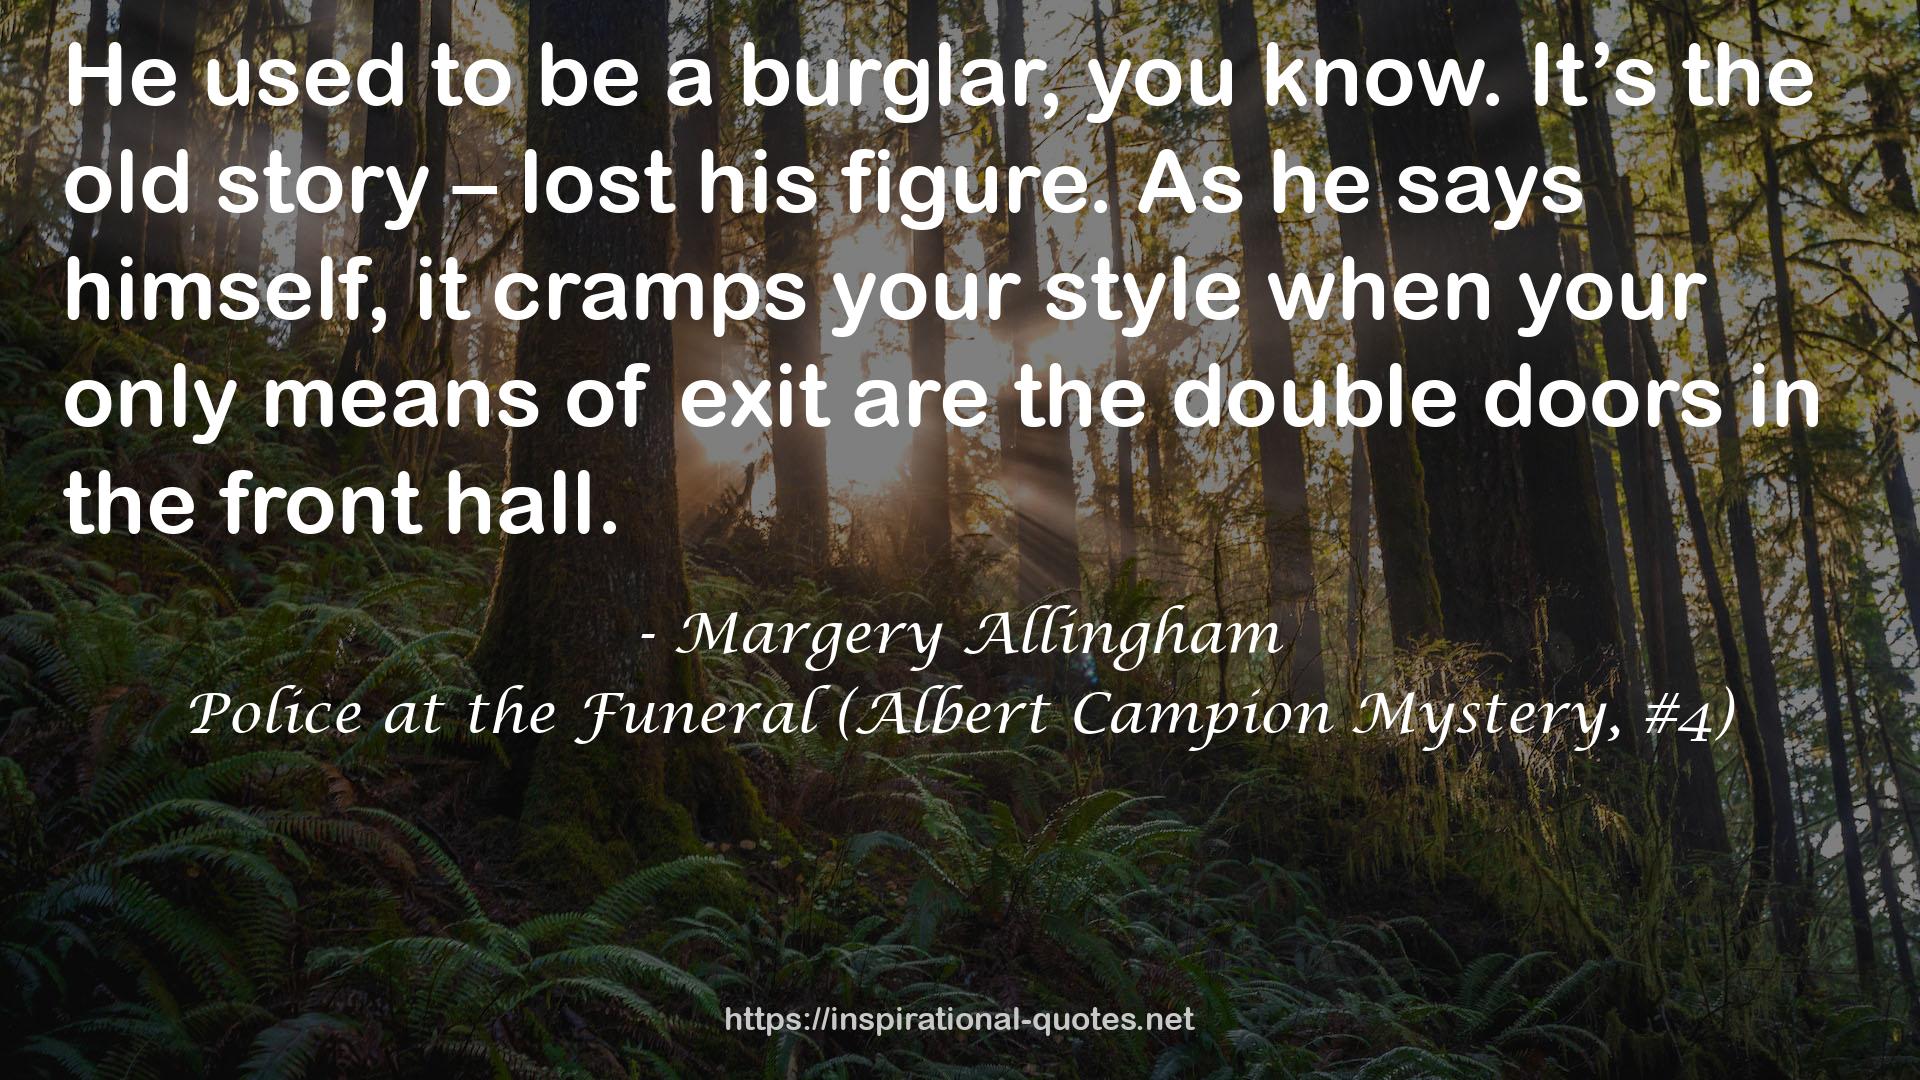 Police at the Funeral (Albert Campion Mystery, #4) QUOTES